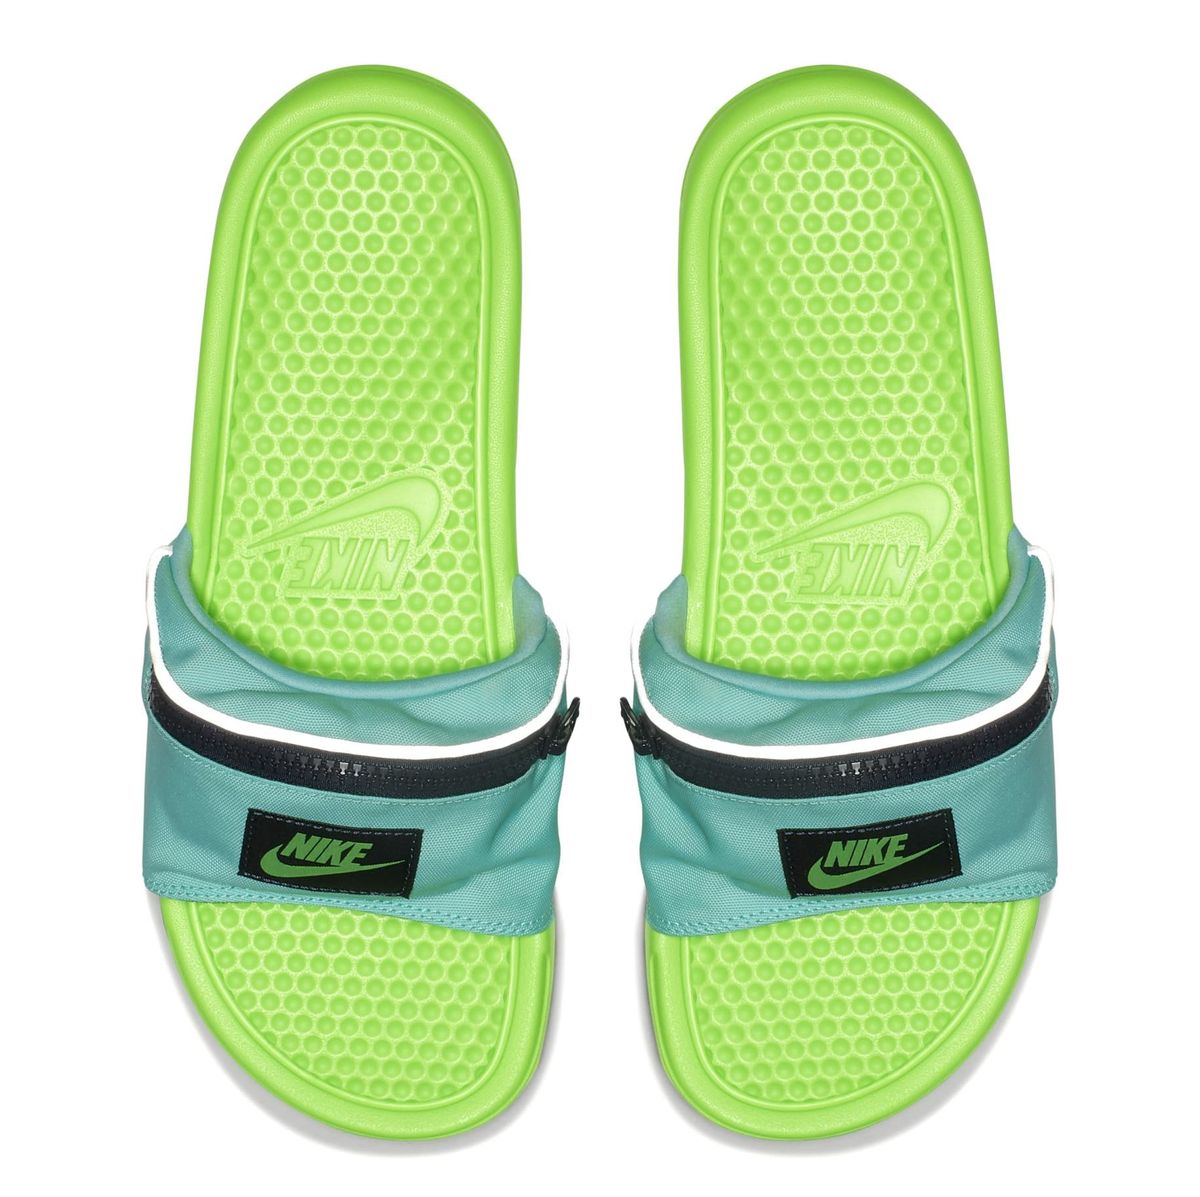 Omitido Gracias imperdonable Nike Fanny Pack Slides Are the Best Summer Sandals a Man Could Ask For